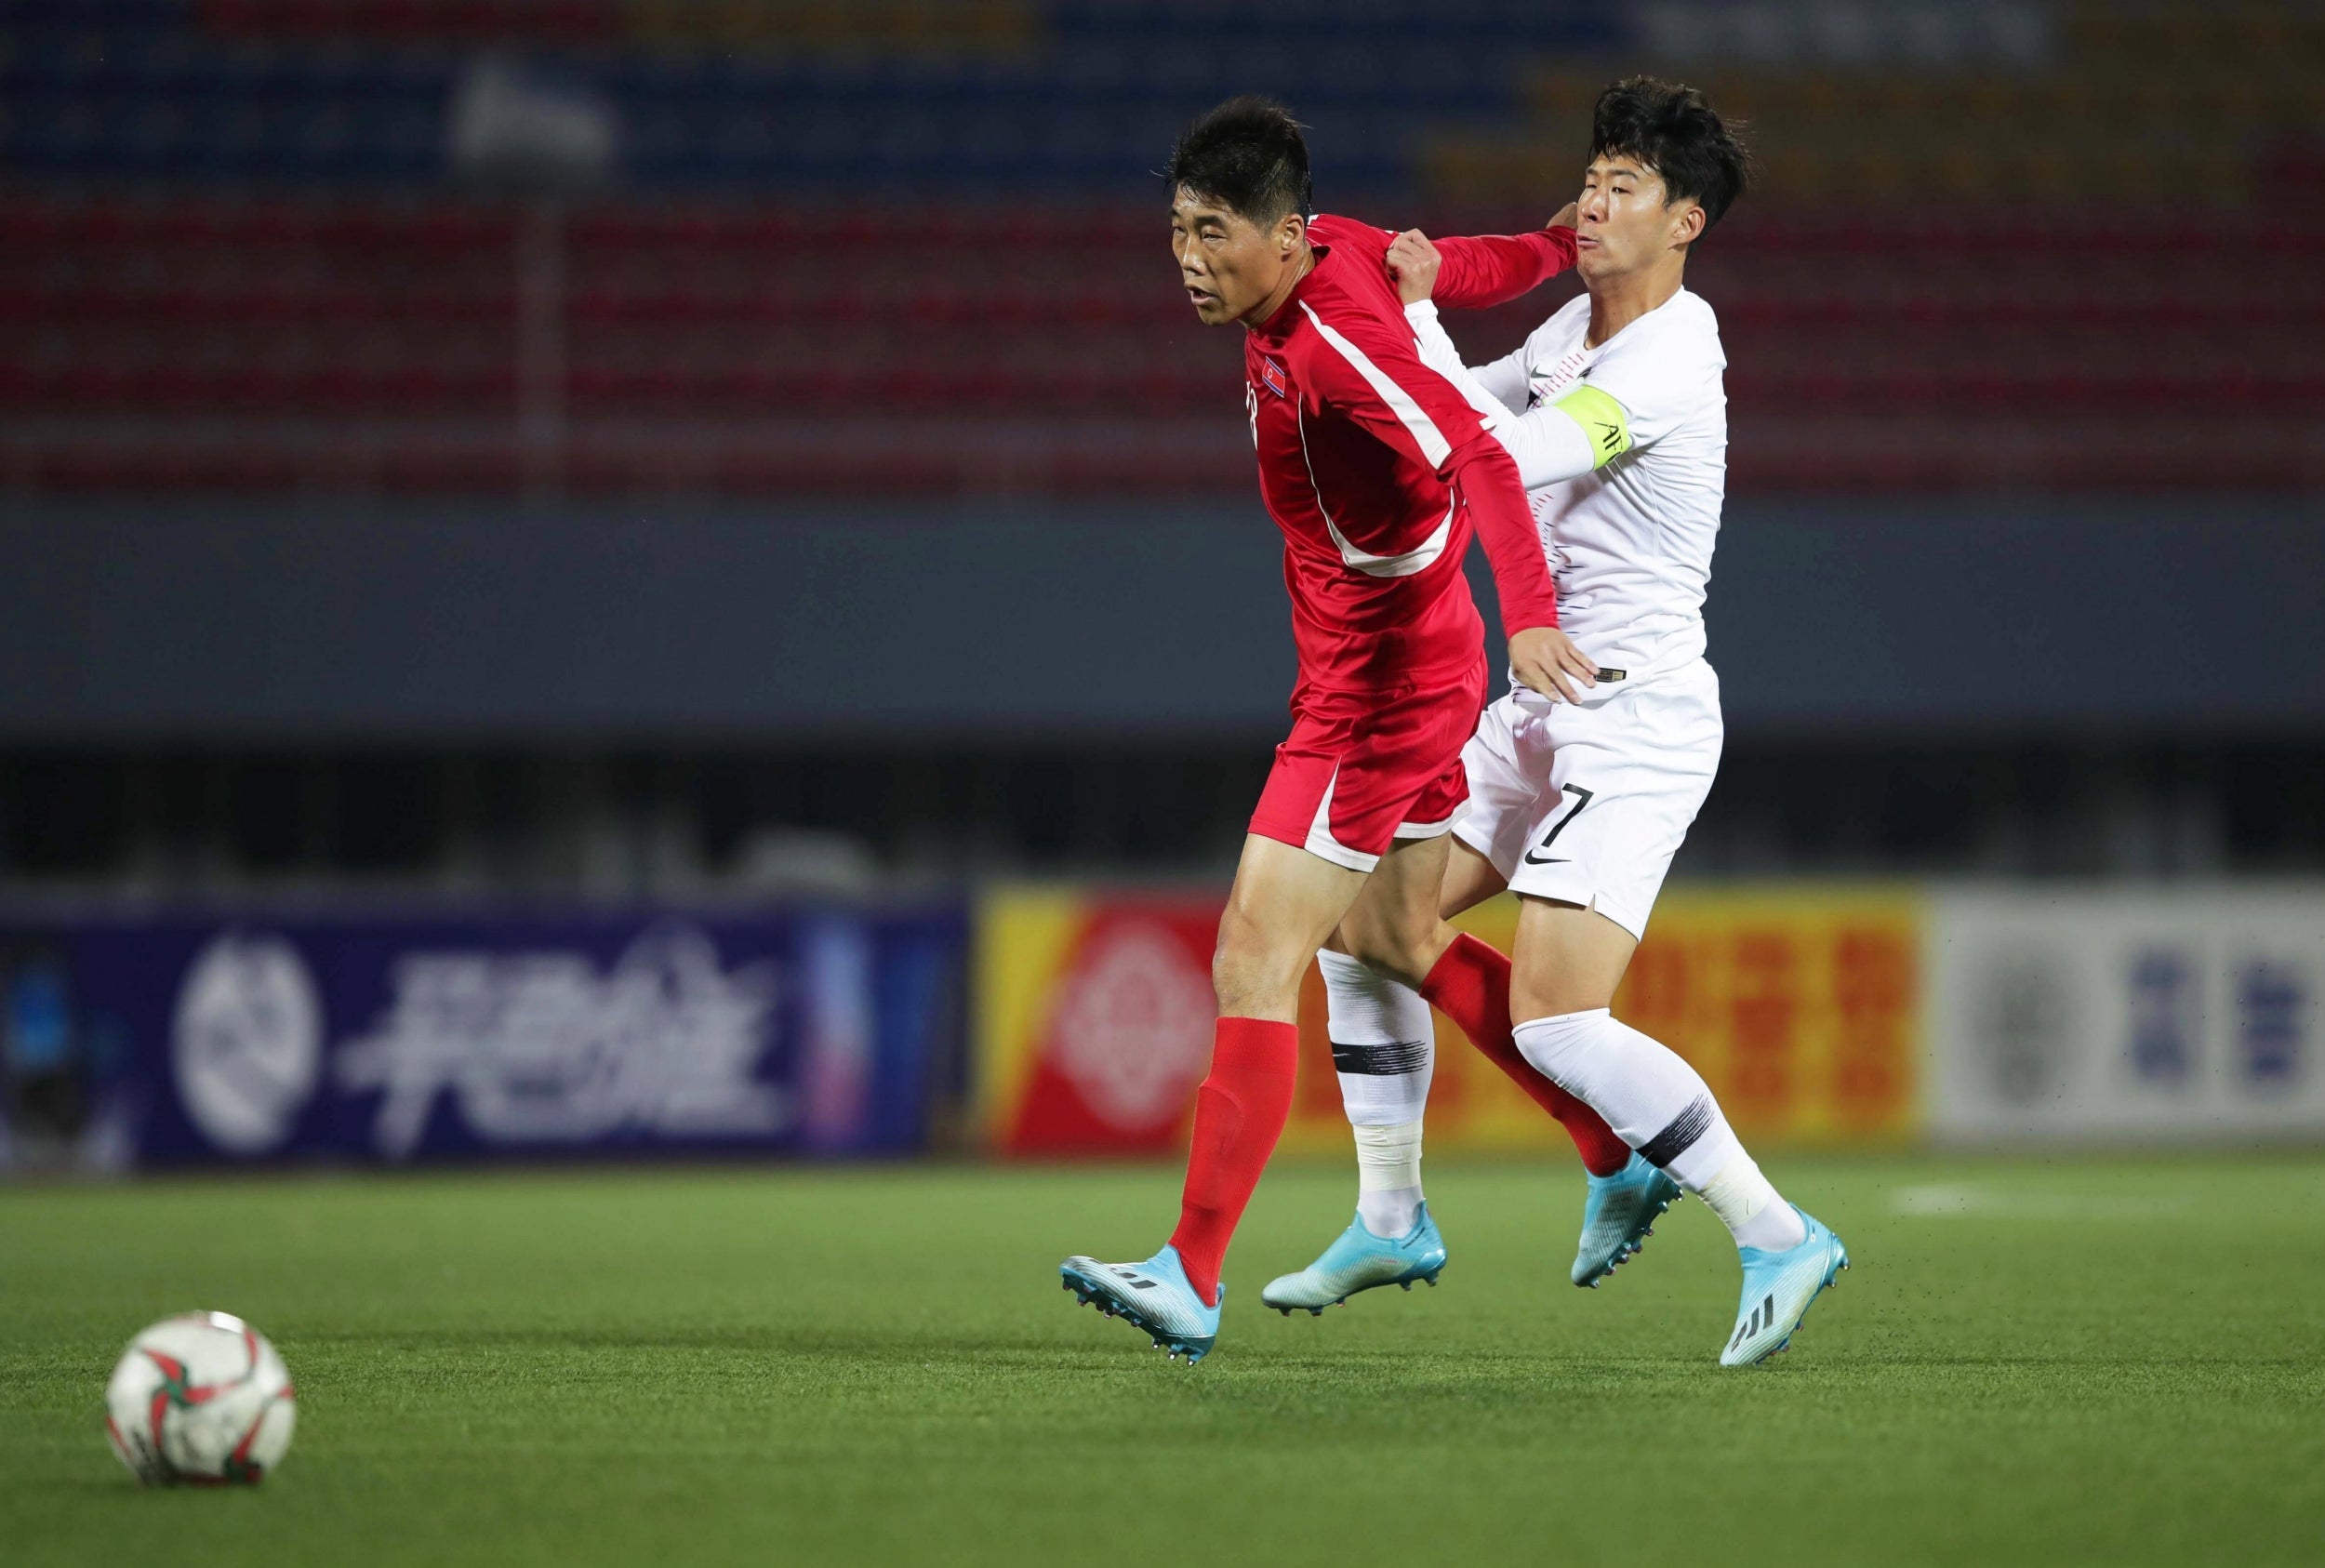 South Korea captain Son Heung-min (right) in action during Tuesday’s match against North Korea in Pyongyang